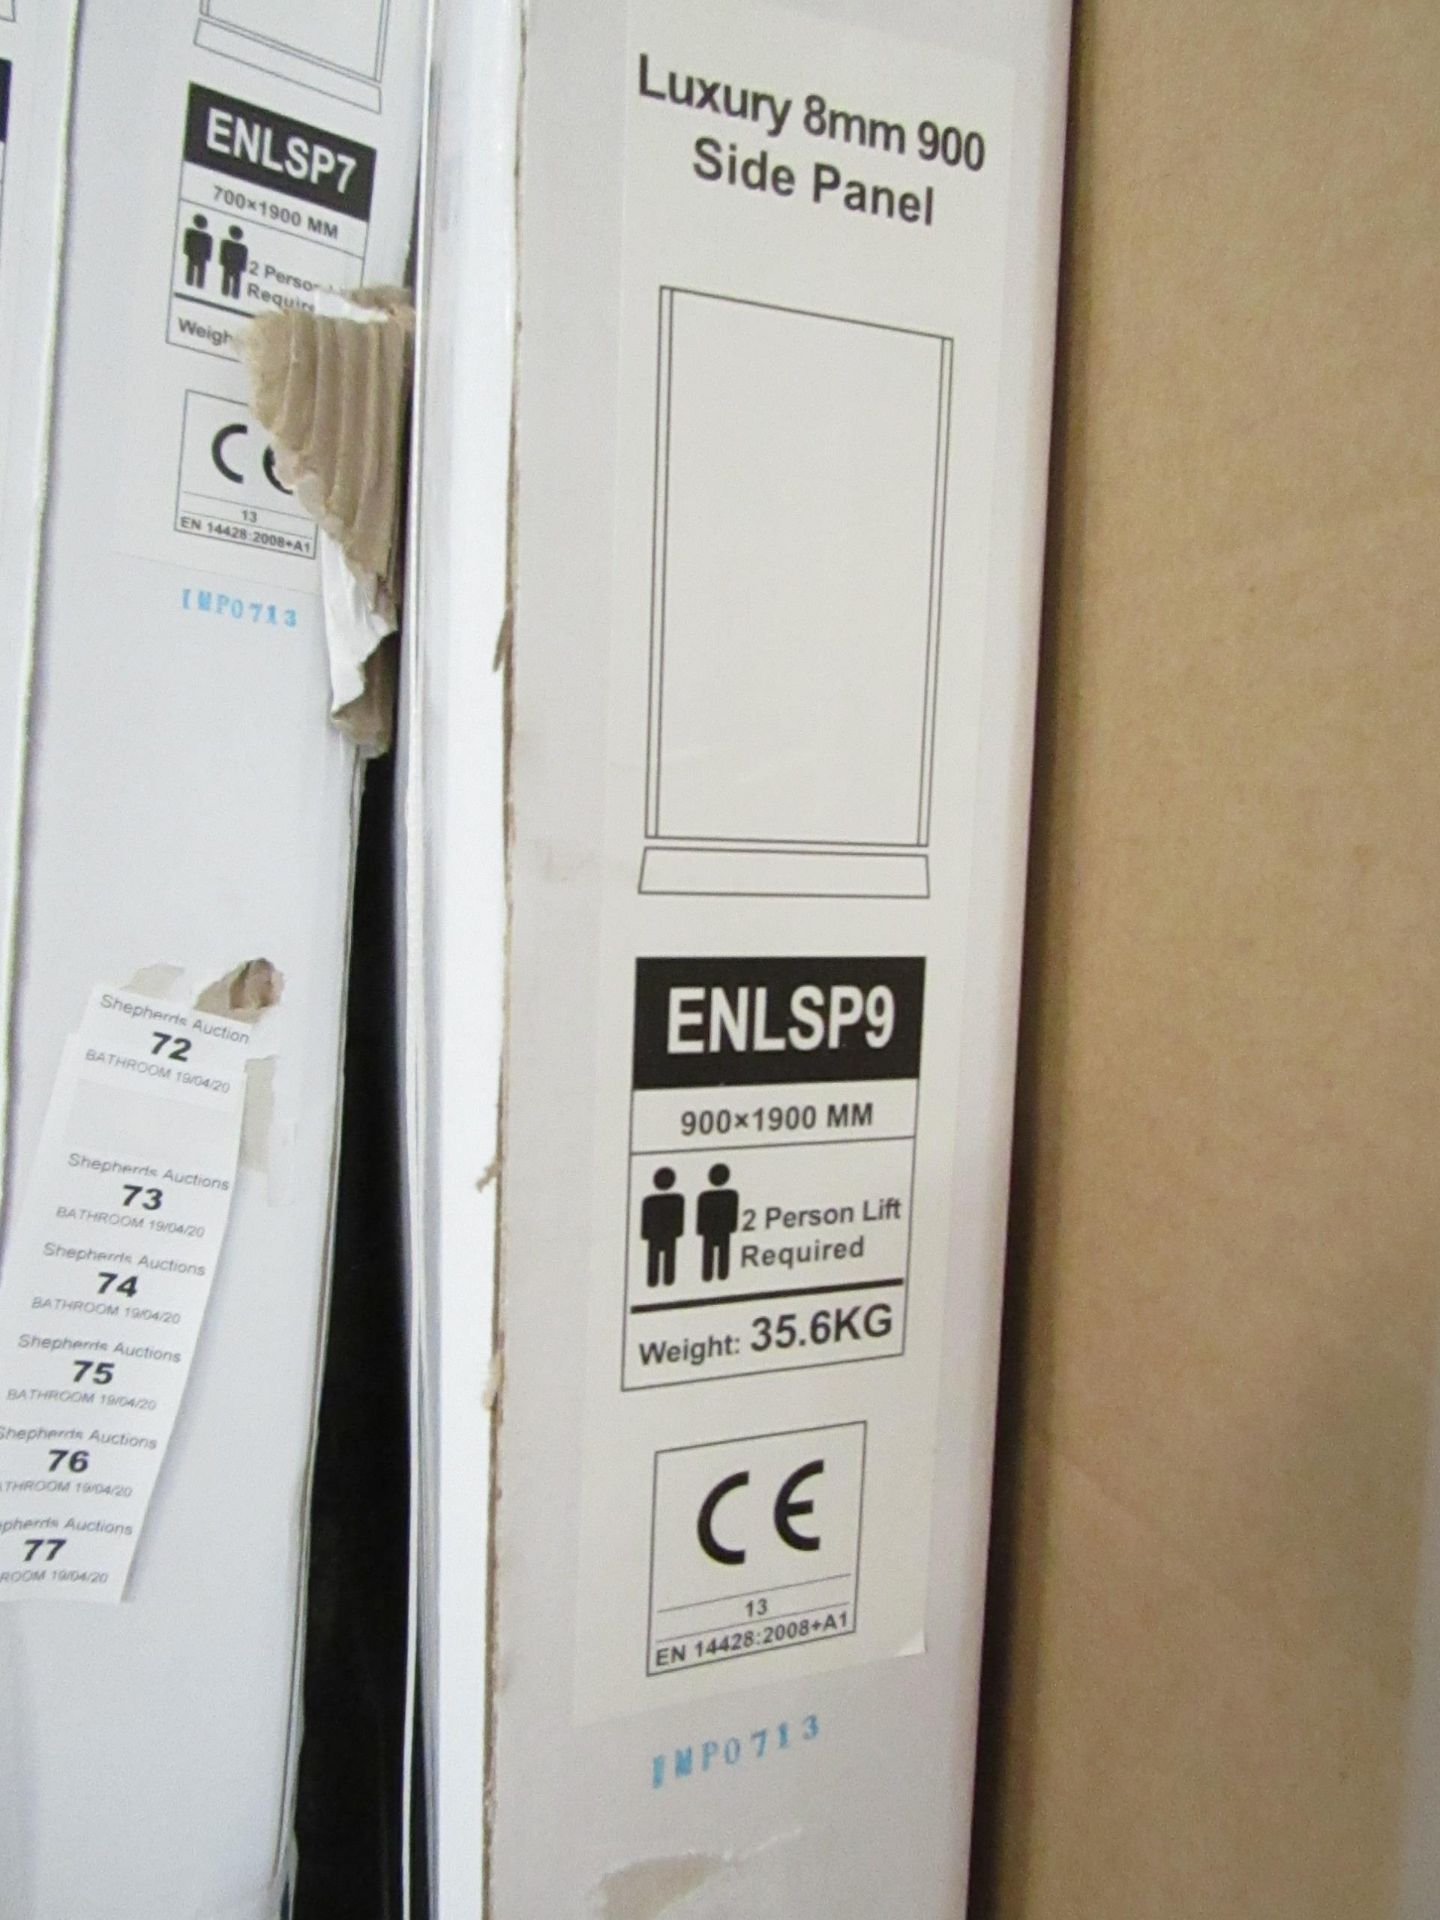 Luxury 8mm 900 Side panel ENLSP9, New and boxed. - Image 2 of 2